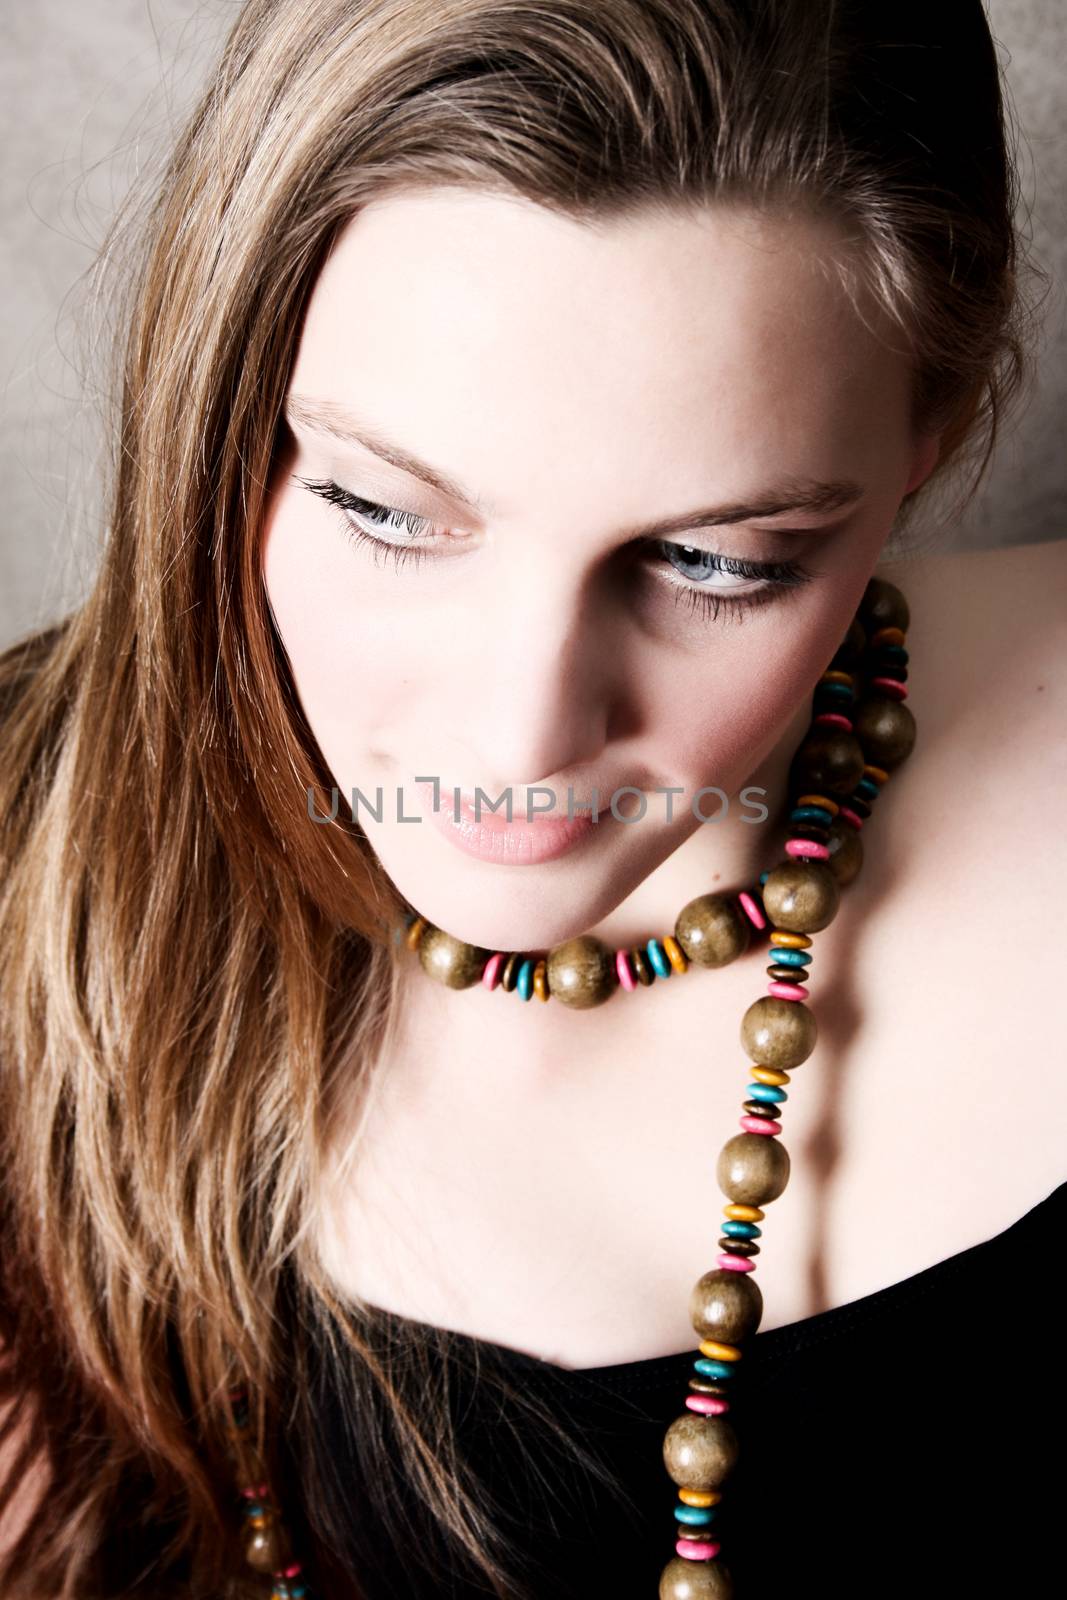 Beautiful female model wearing wooden beads and black top